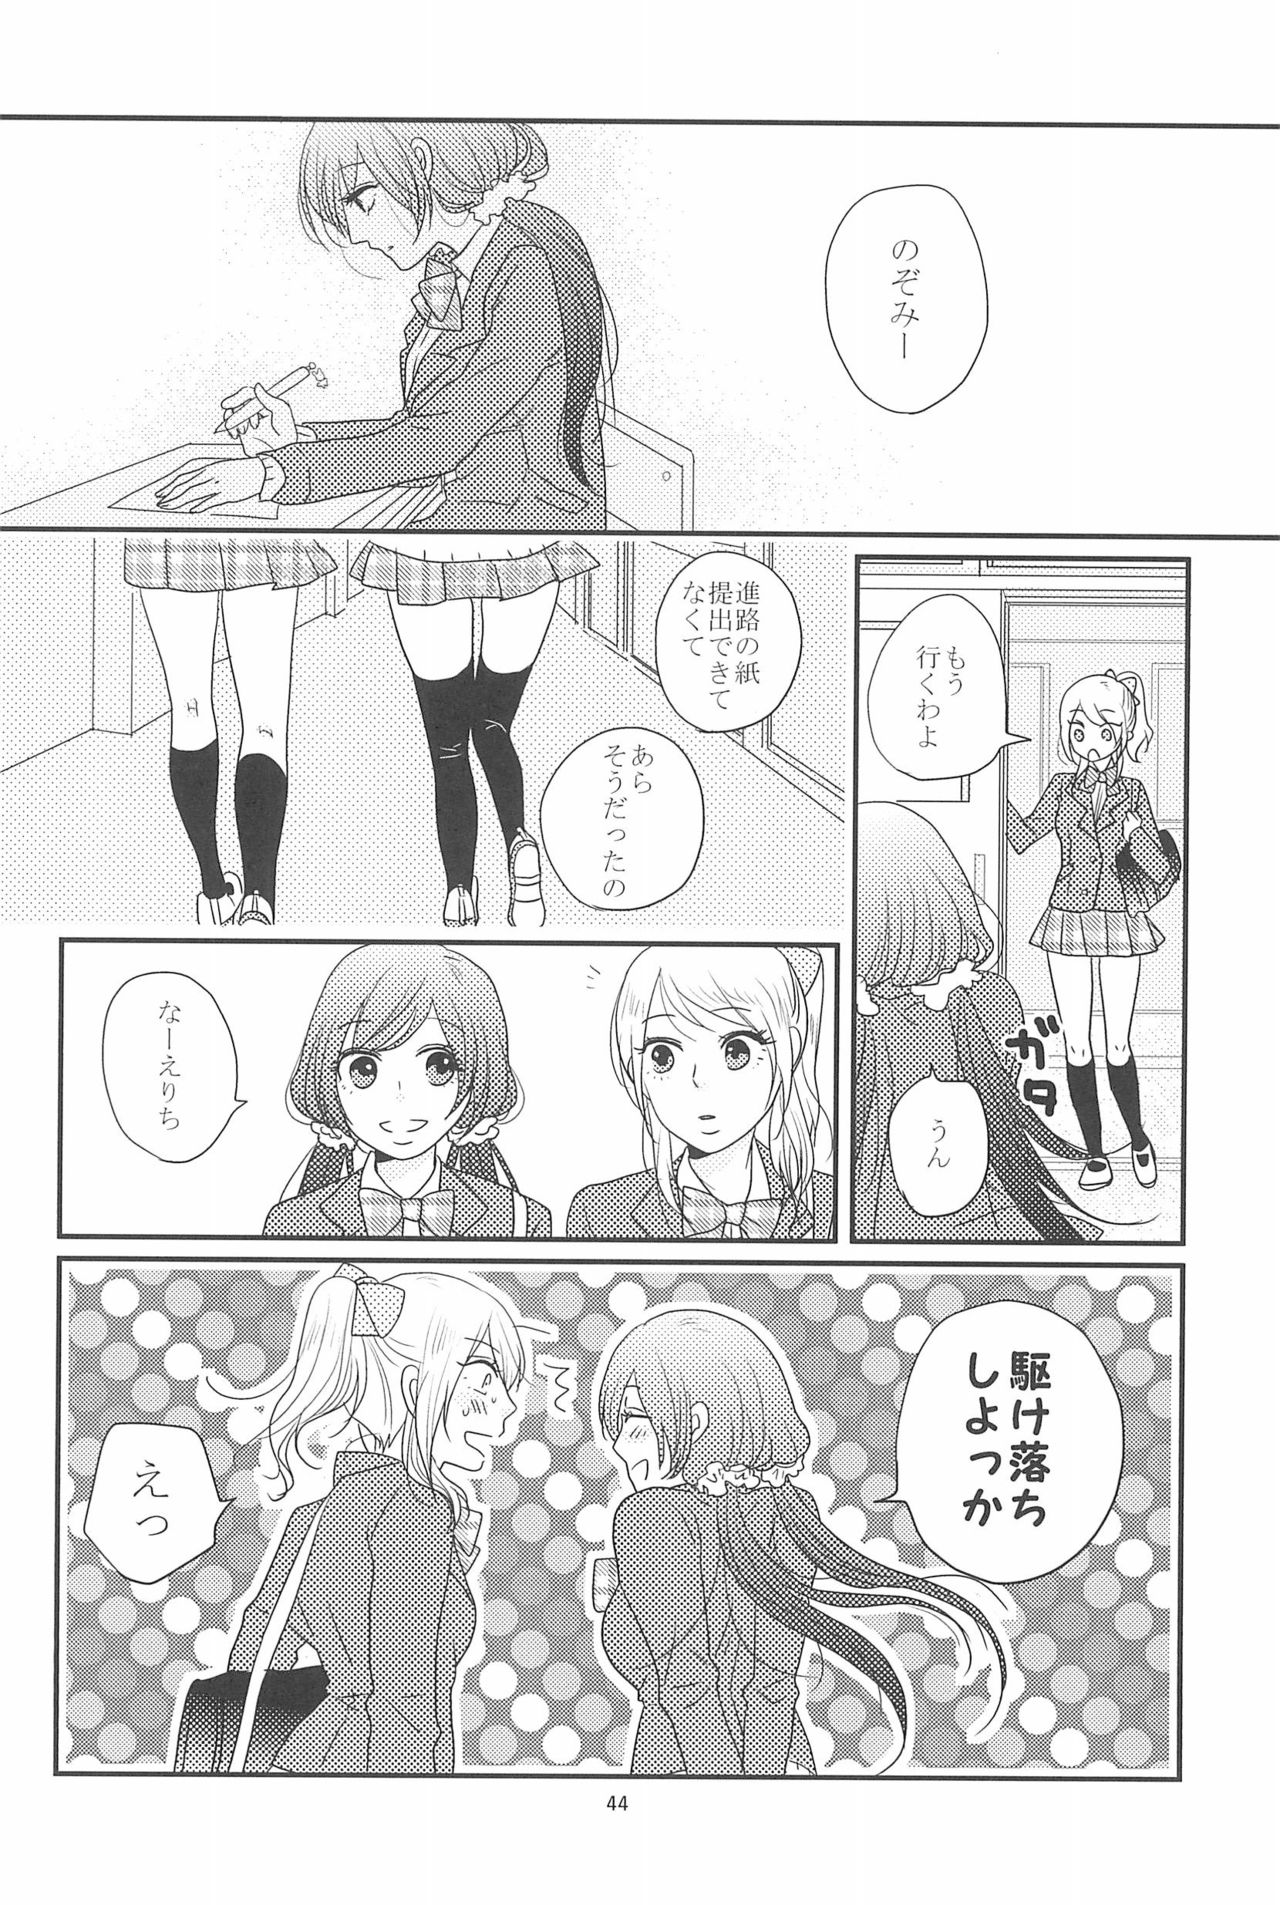 (C90) [BK*N2 (Mikawa Miso)] HAPPY GO LUCKY DAYS (Love Live!) page 48 full